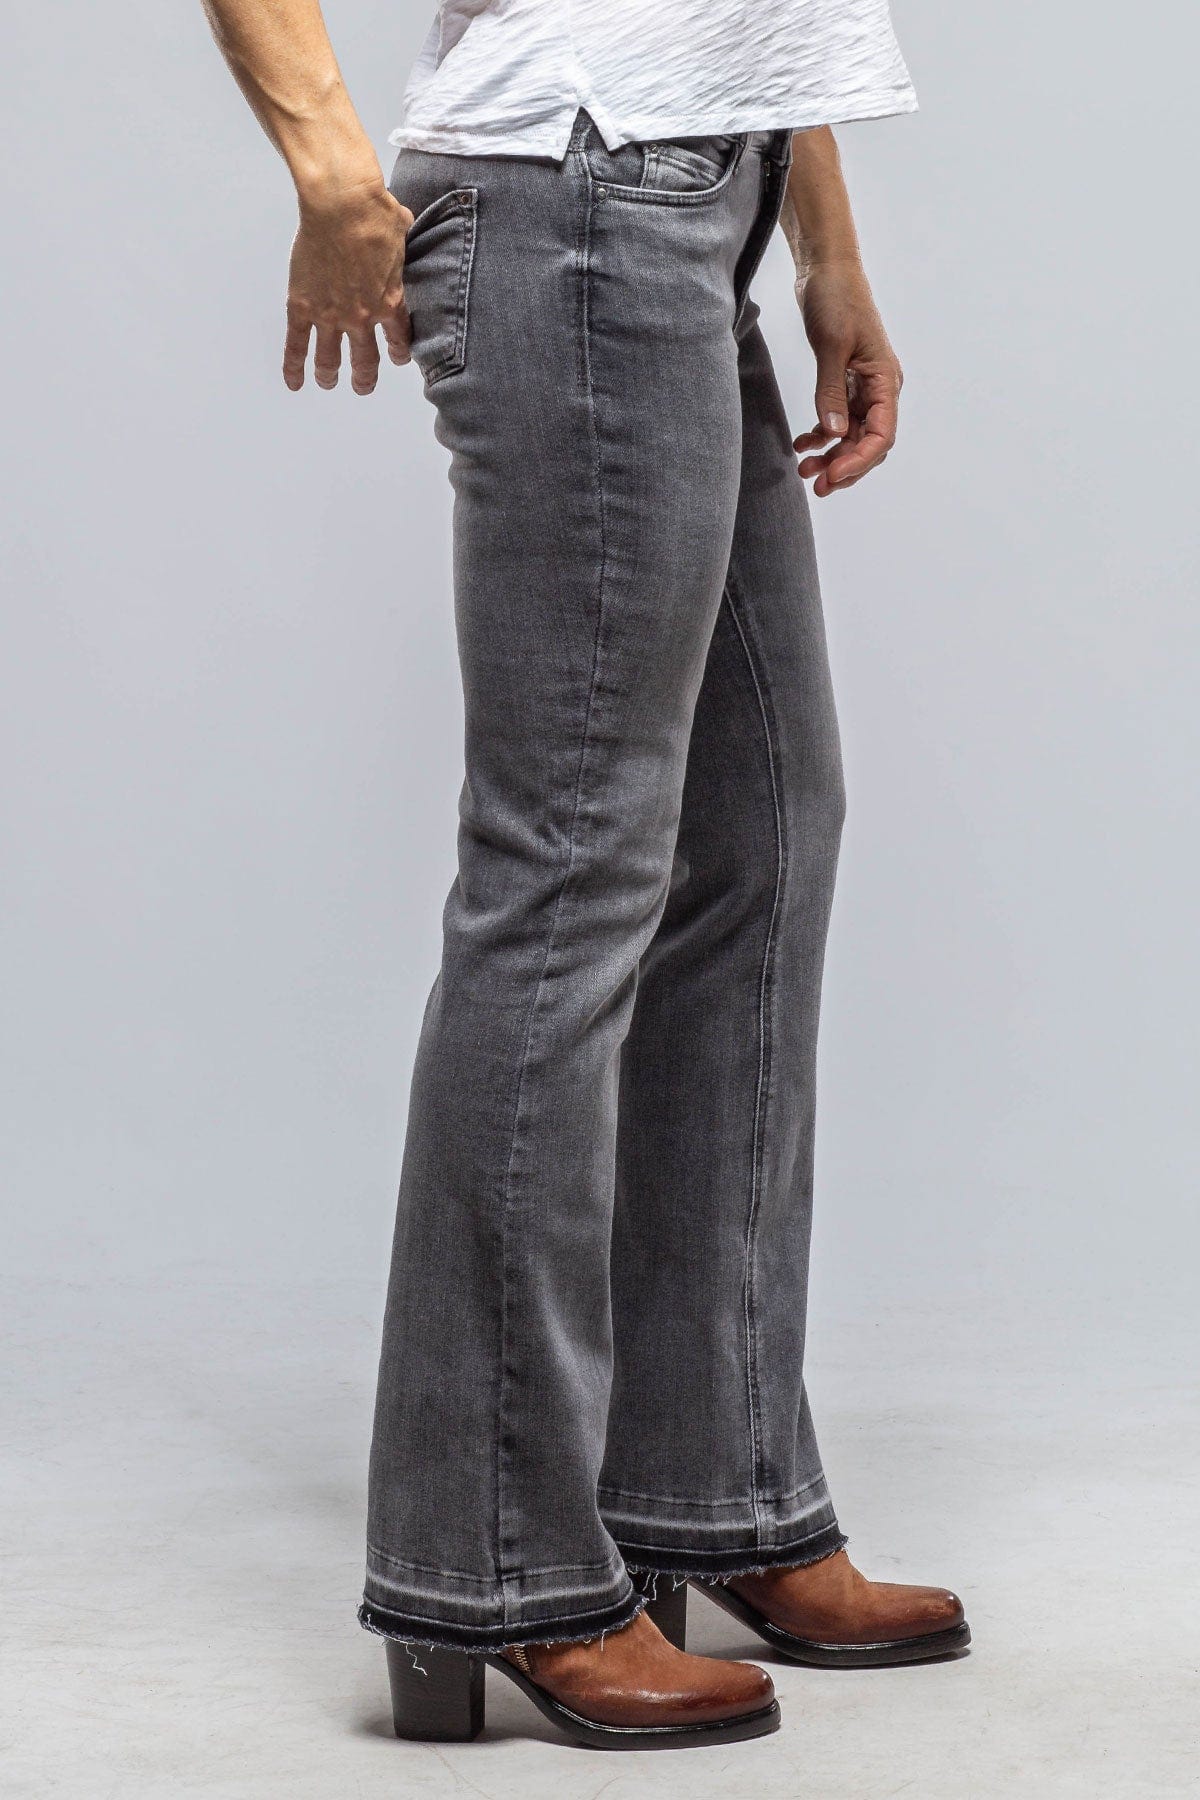  Grey Bootcut Jeans Womens